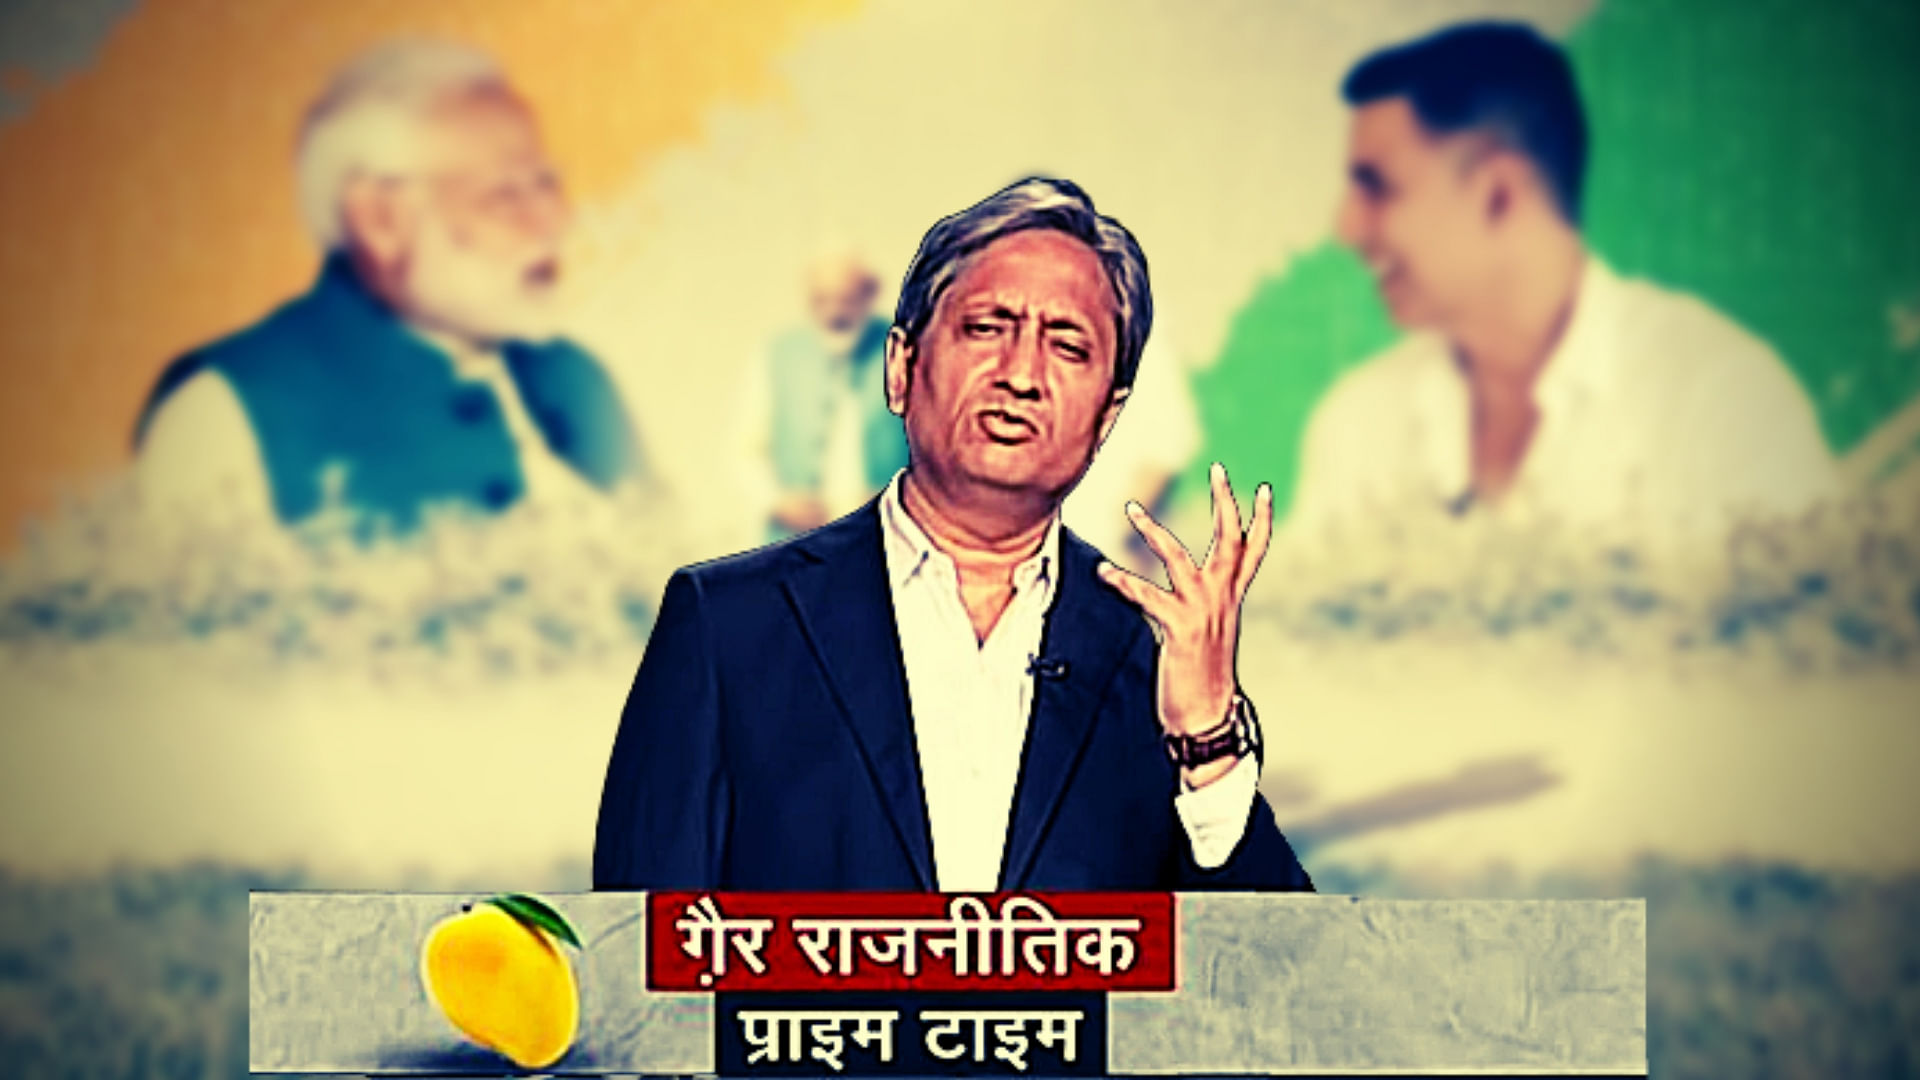 “If politicians are indulging in non-political interactions... why shouldn’t we?” Ravish Kumar asked in his show.